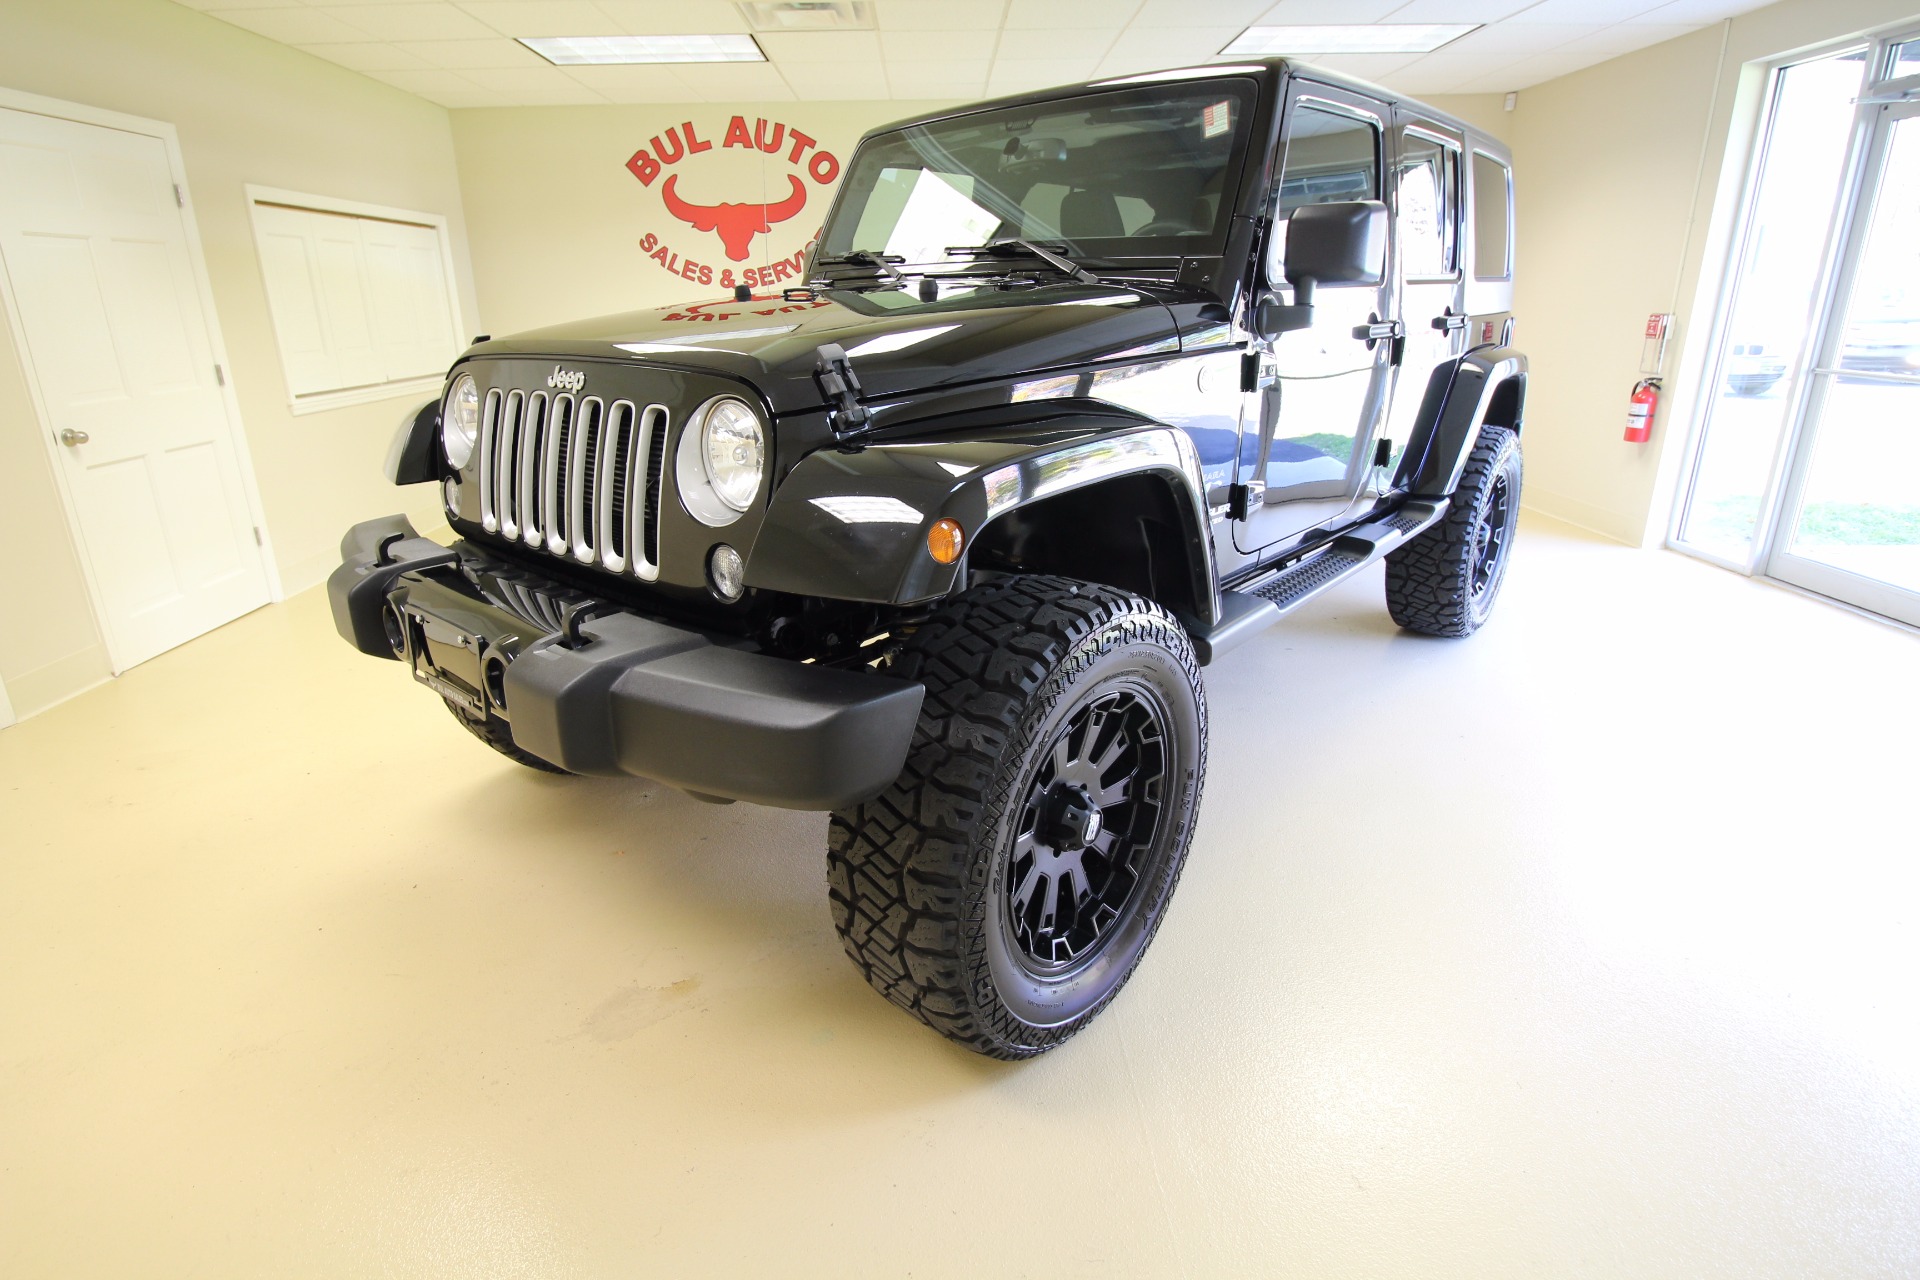 2016 Jeep Wrangler Unlimited For Sale $39990 | 16296 Bul Auto NY